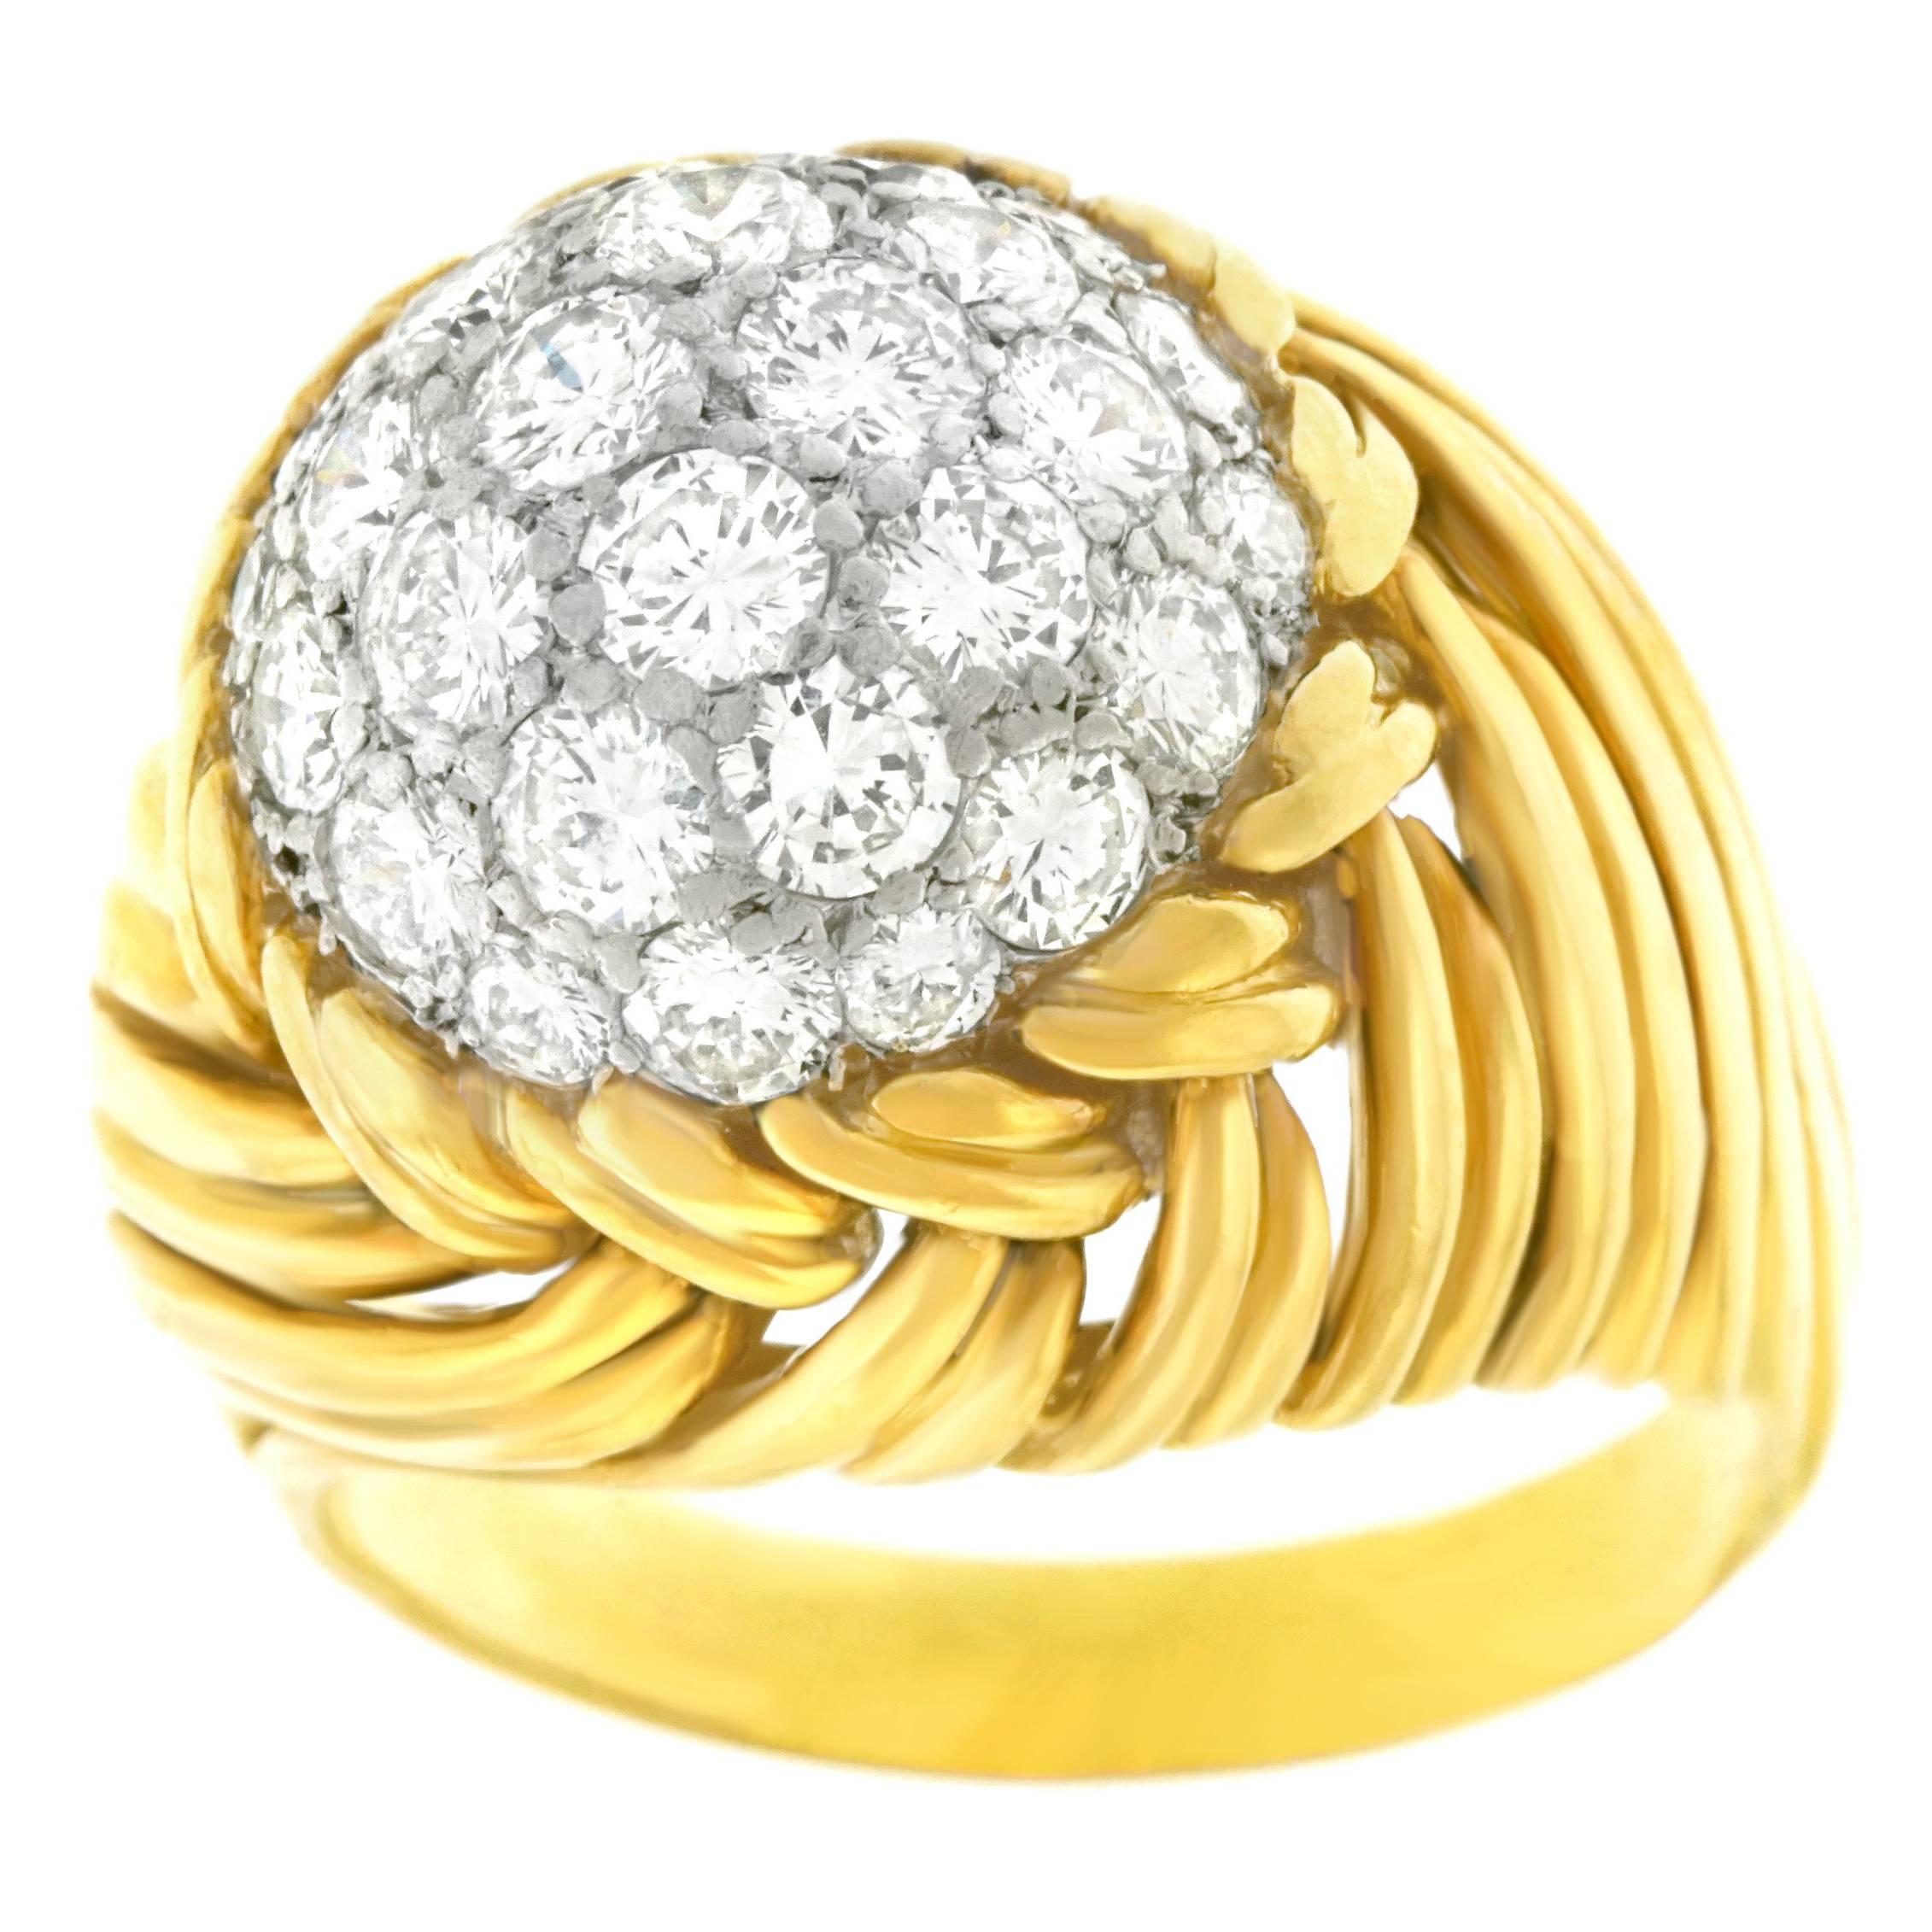 1960s Van Cleef & Arpels Diamond and Gold Ring